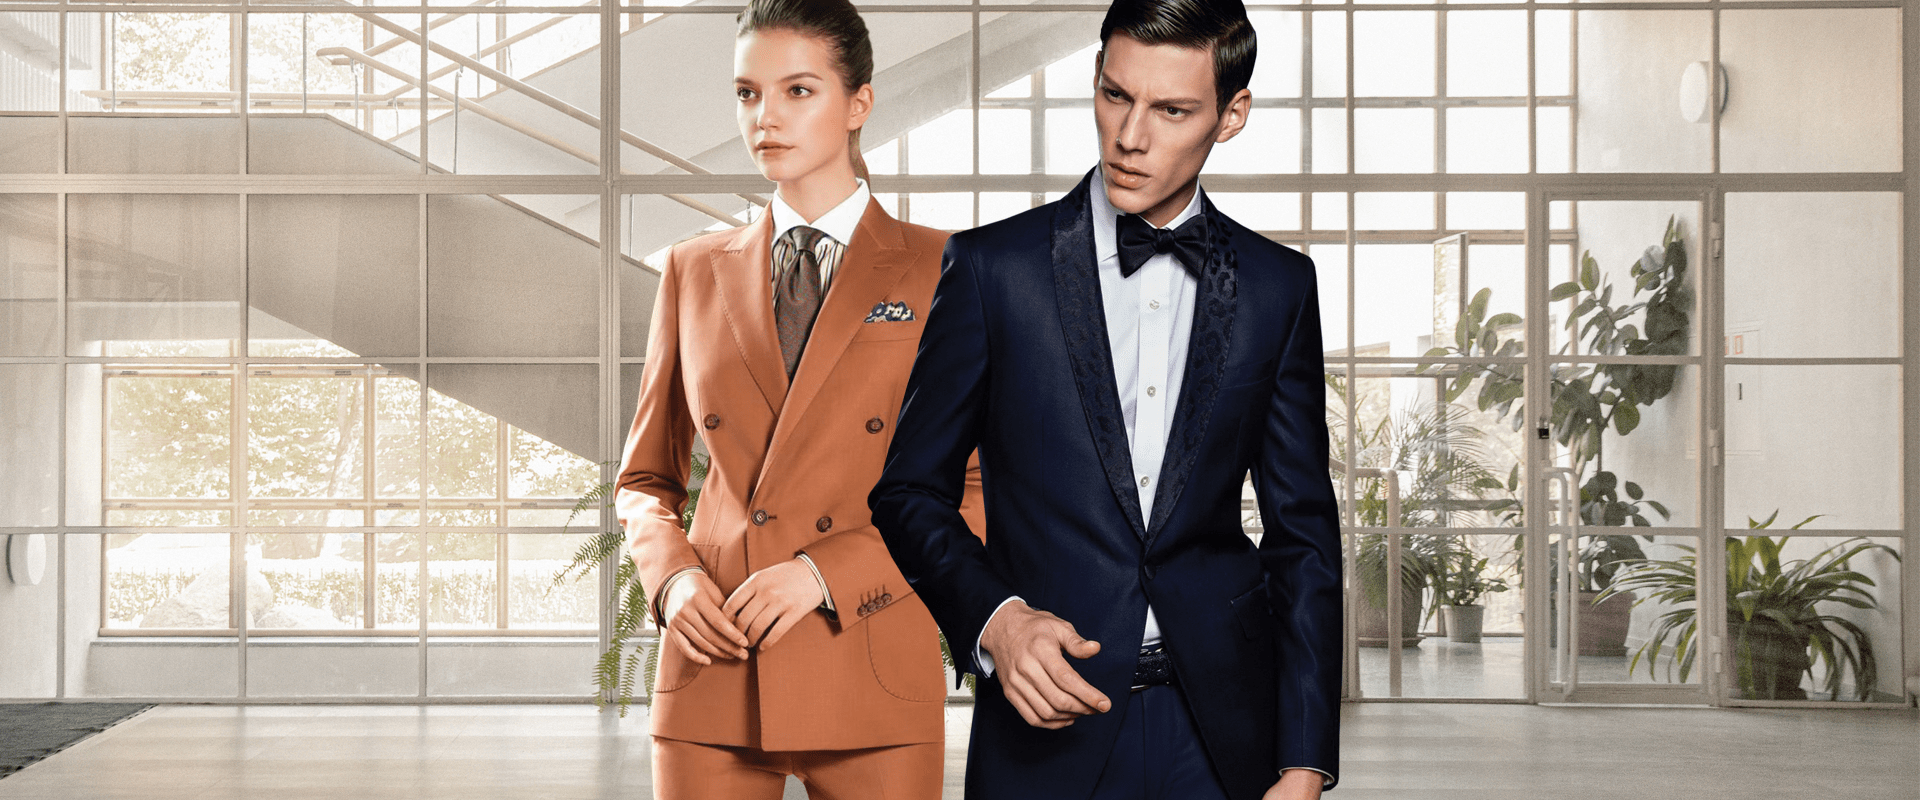 Germanicos bespoke tailor melbourne couple woman and man brown and blue modern suits